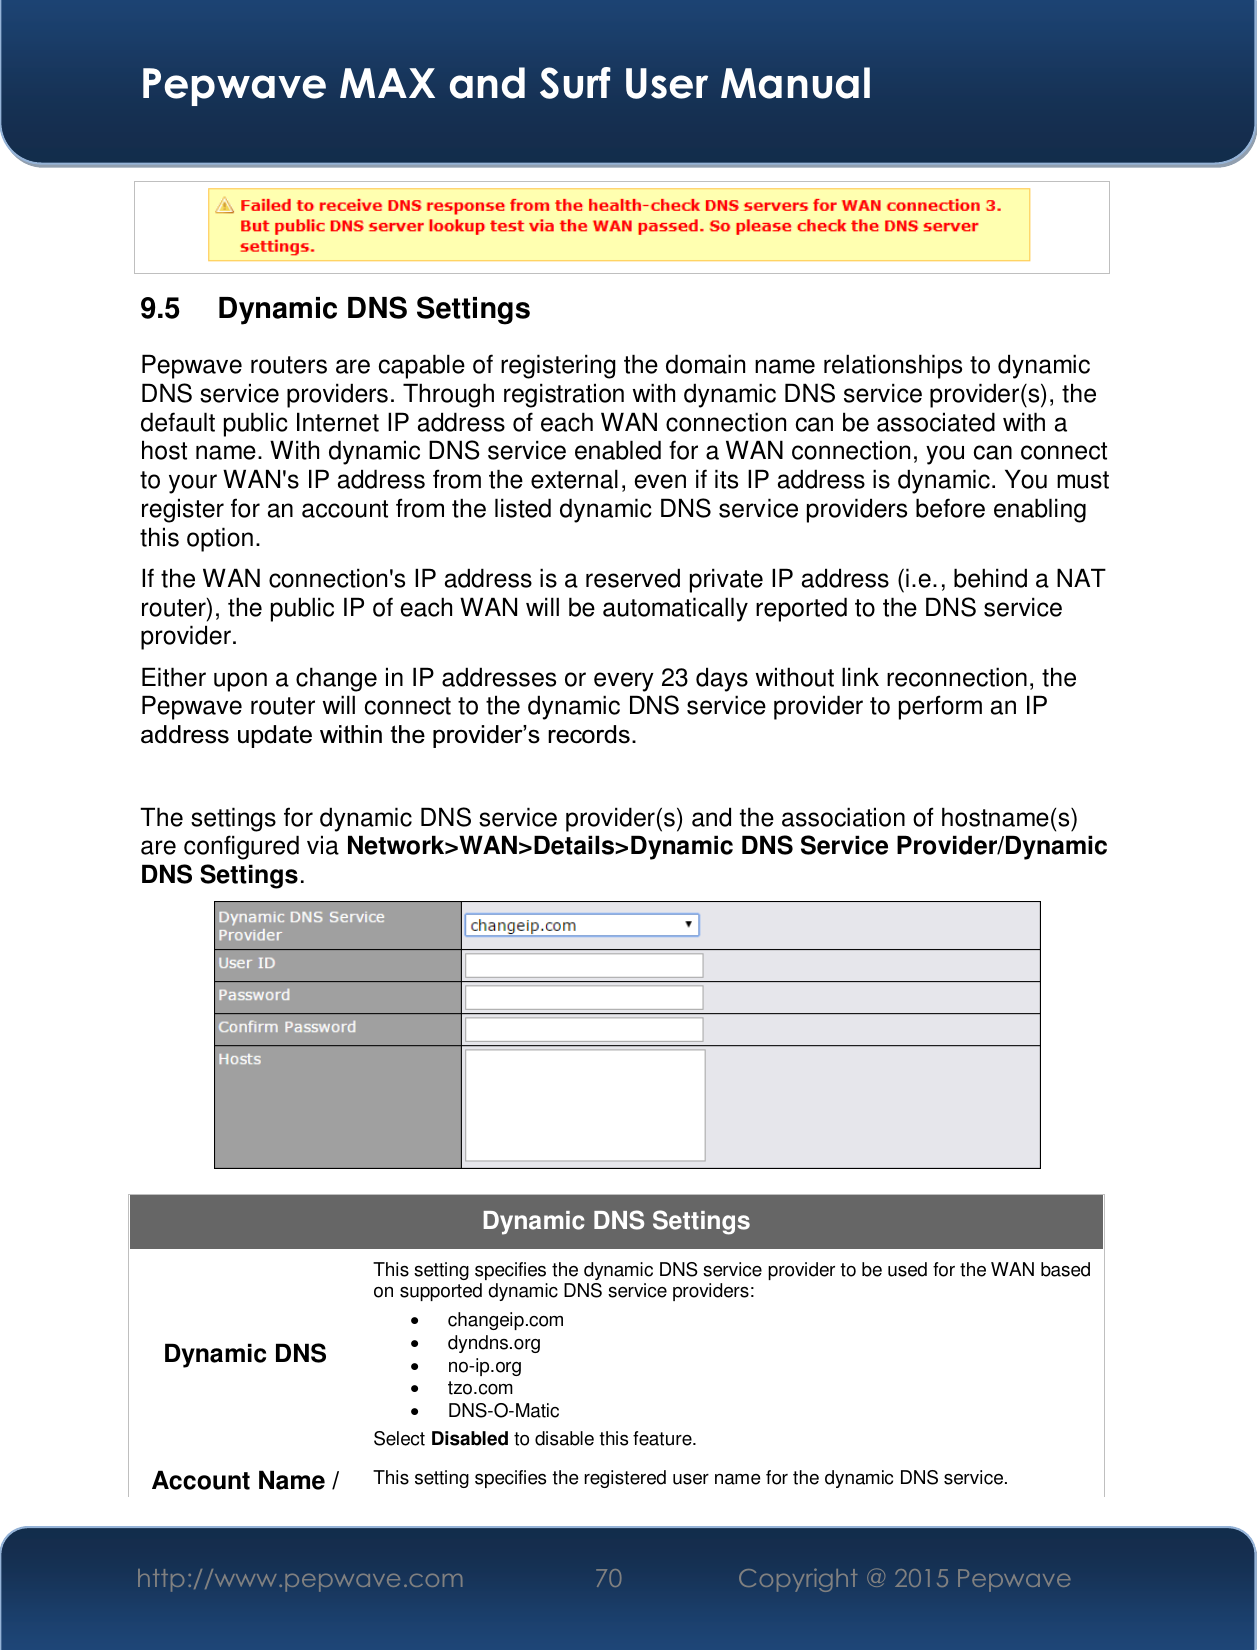  Pepwave MAX and Surf User Manual http://www.pepwave.com  70    Copyright @ 2015 Pepwave   9.5  Dynamic DNS Settings Pepwave routers are capable of registering the domain name relationships to dynamic DNS service providers. Through registration with dynamic DNS service provider(s), the default public Internet IP address of each WAN connection can be associated with a host name. With dynamic DNS service enabled for a WAN connection, you can connect to your WAN&apos;s IP address from the external, even if its IP address is dynamic. You must register for an account from the listed dynamic DNS service providers before enabling this option. If the WAN connection&apos;s IP address is a reserved private IP address (i.e., behind a NAT router), the public IP of each WAN will be automatically reported to the DNS service provider. Either upon a change in IP addresses or every 23 days without link reconnection, the Pepwave router will connect to the dynamic DNS service provider to perform an IP DGGUHVVXSGDWHZLWKLQWKHSURYLGHU¶VUHFRUGV The settings for dynamic DNS service provider(s) and the association of hostname(s) are configured via Network&gt;WAN&gt;Details&gt;Dynamic DNS Service Provider/Dynamic DNS Settings.  Dynamic DNS Settings Dynamic DNS This setting specifies the dynamic DNS service provider to be used for the WAN based on supported dynamic DNS service providers: x changeip.com x dyndns.org x no-ip.org x tzo.com x DNS-O-Matic Select Disabled to disable this feature. Account Name /  This setting specifies the registered user name for the dynamic DNS service. 